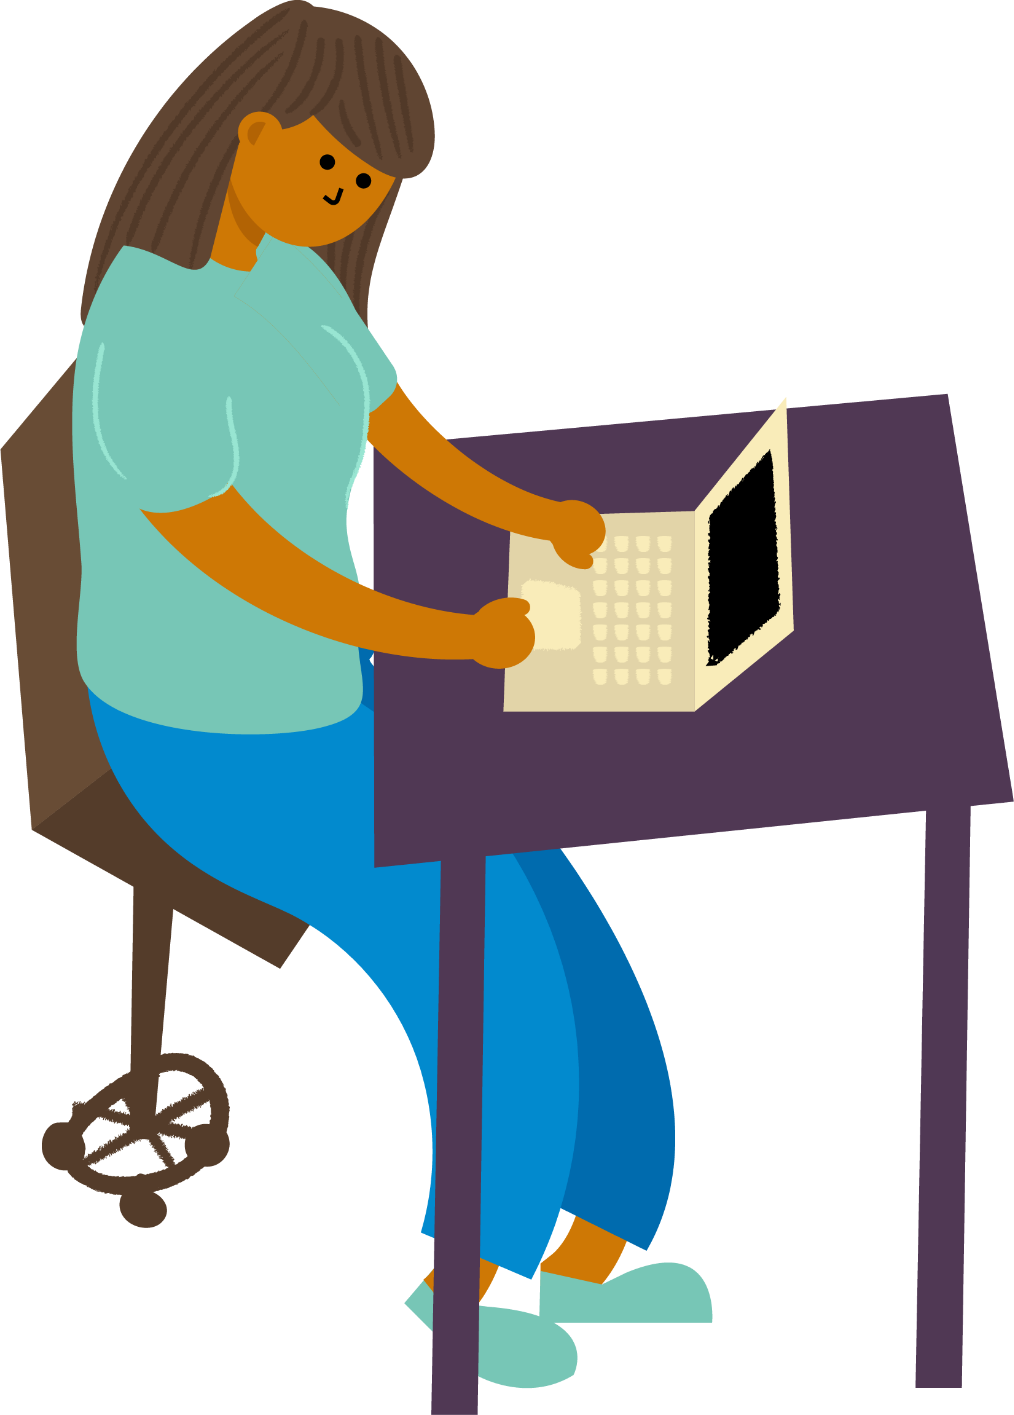 An illustration of a woman with long brown hair, a light blue t-shirt, and blue jeans is sitting on an office chair at a desk using a laptop